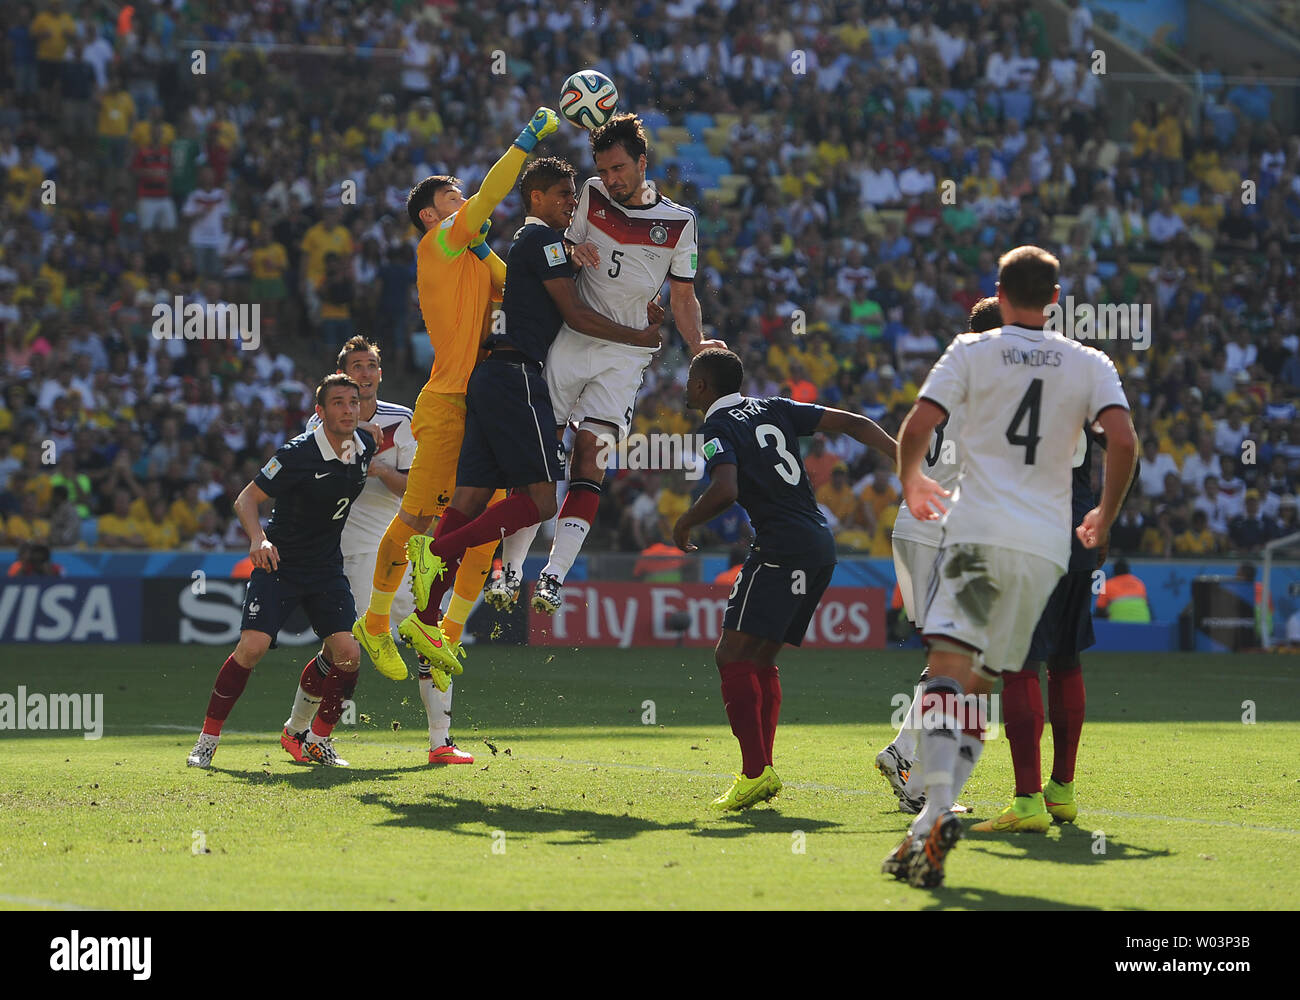 Hugo Lloris of France punches clear under pressure from Mats Hummels of Germany during the 2014 FIFA World Cup Quarter Final match at the Estadio do Maracana in Rio de Janeiro, Brazil on July 04, 2014. UPI/Chris Brunskill Stock Photo